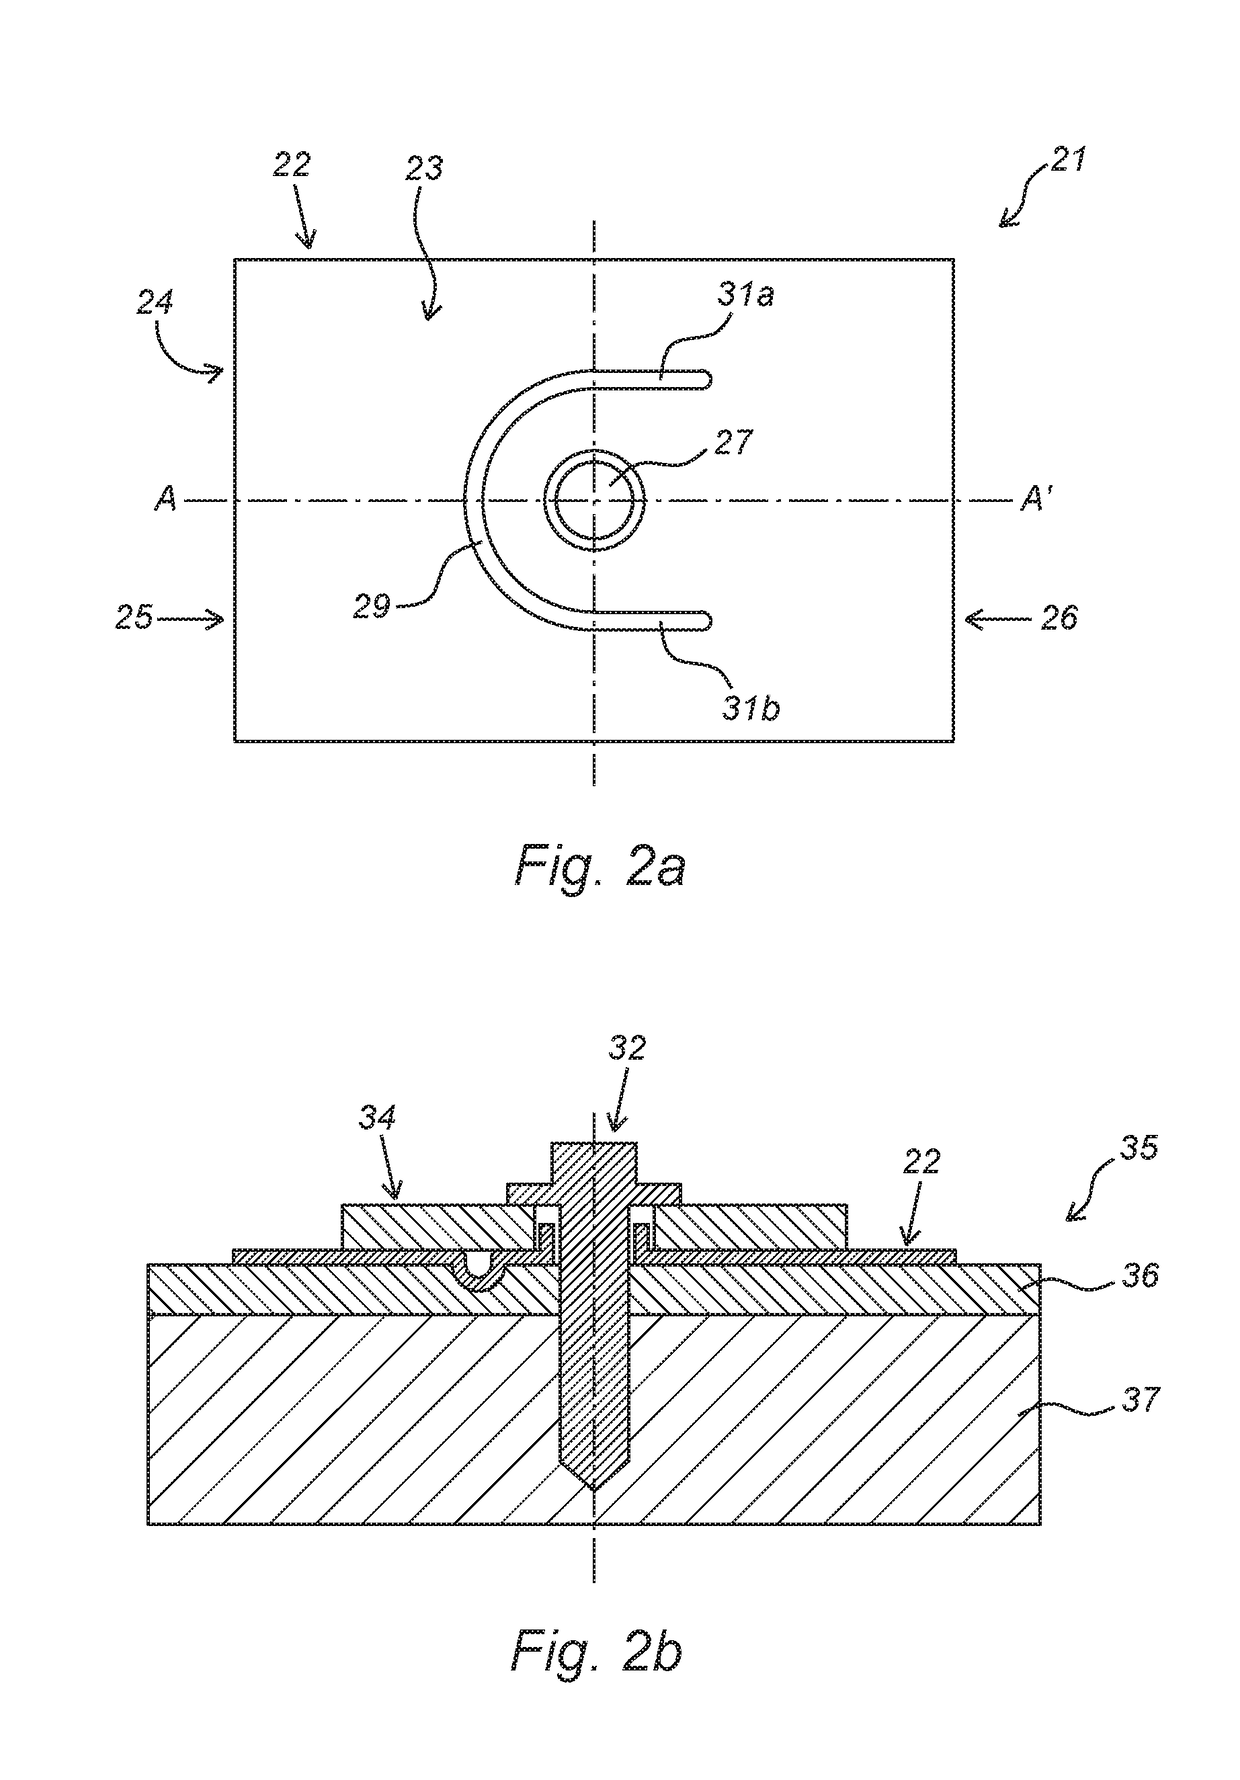 Fastening Structure and Method for Fitting a Coupling Profile to a Pitched Roof Covered with Shingles